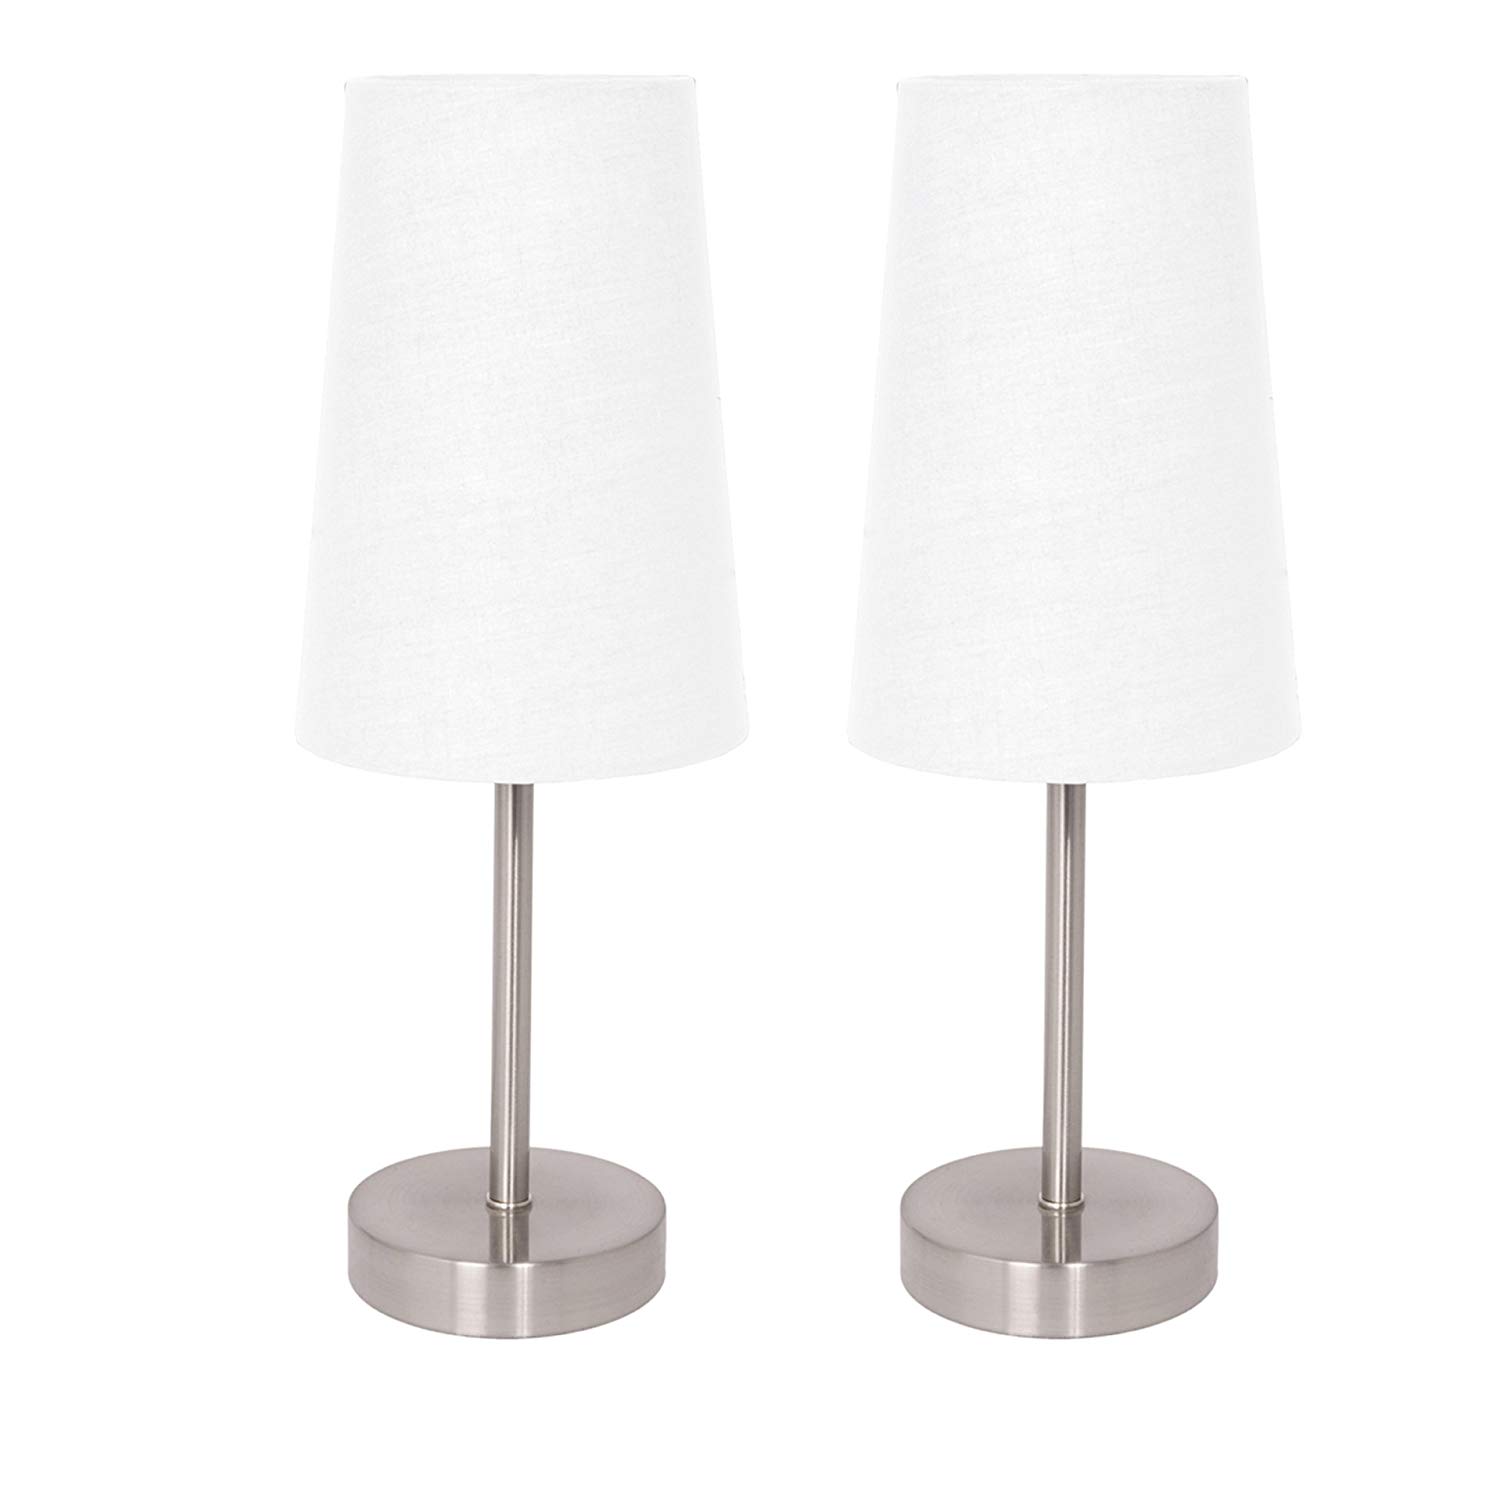 light accents table lamp set tall brushed nickel accent lamps with fabric shades pack drawer end nate berkus marble wood nightstand patio furniture dining sets inexpensive round